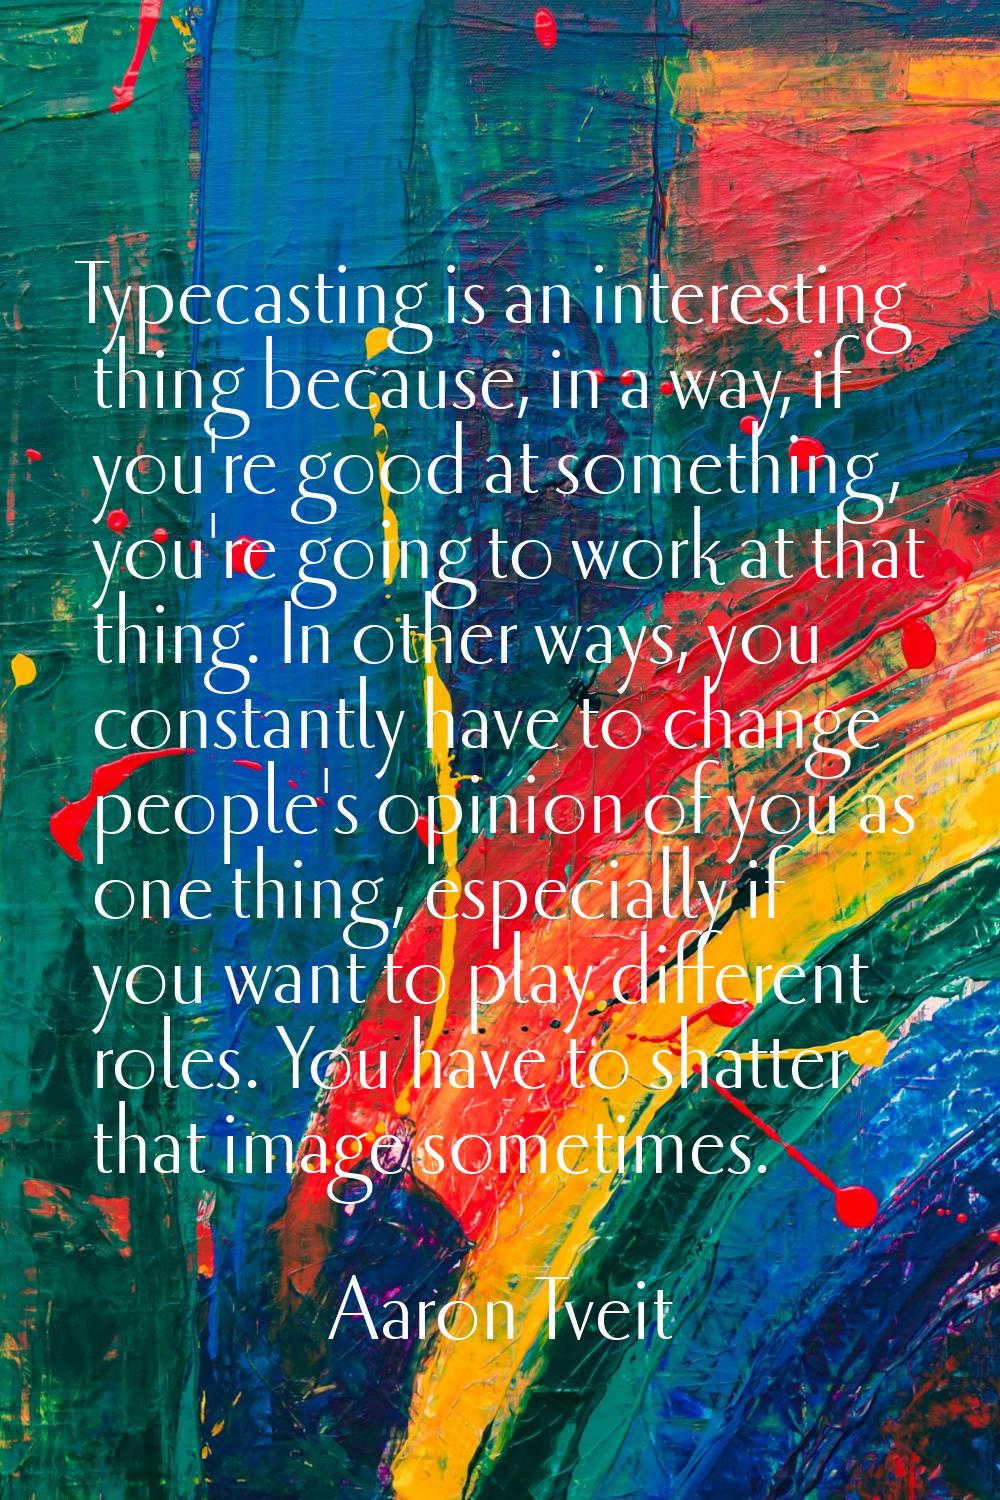 Typecasting is an interesting thing because, in a way, if you're good at something, you're going to